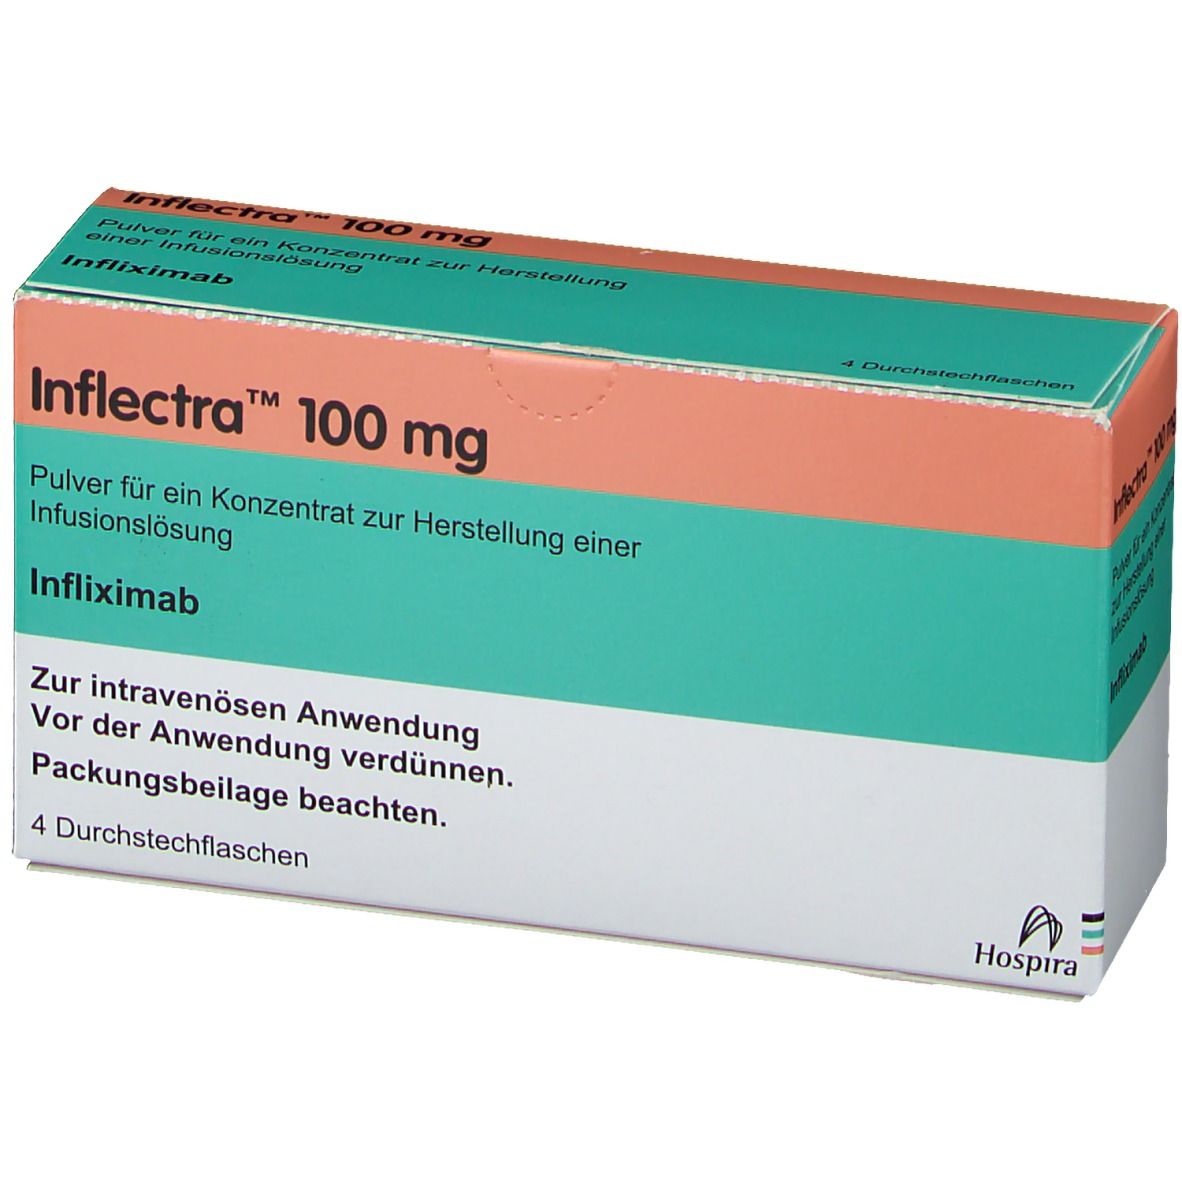 Inflectra™ 100 mg